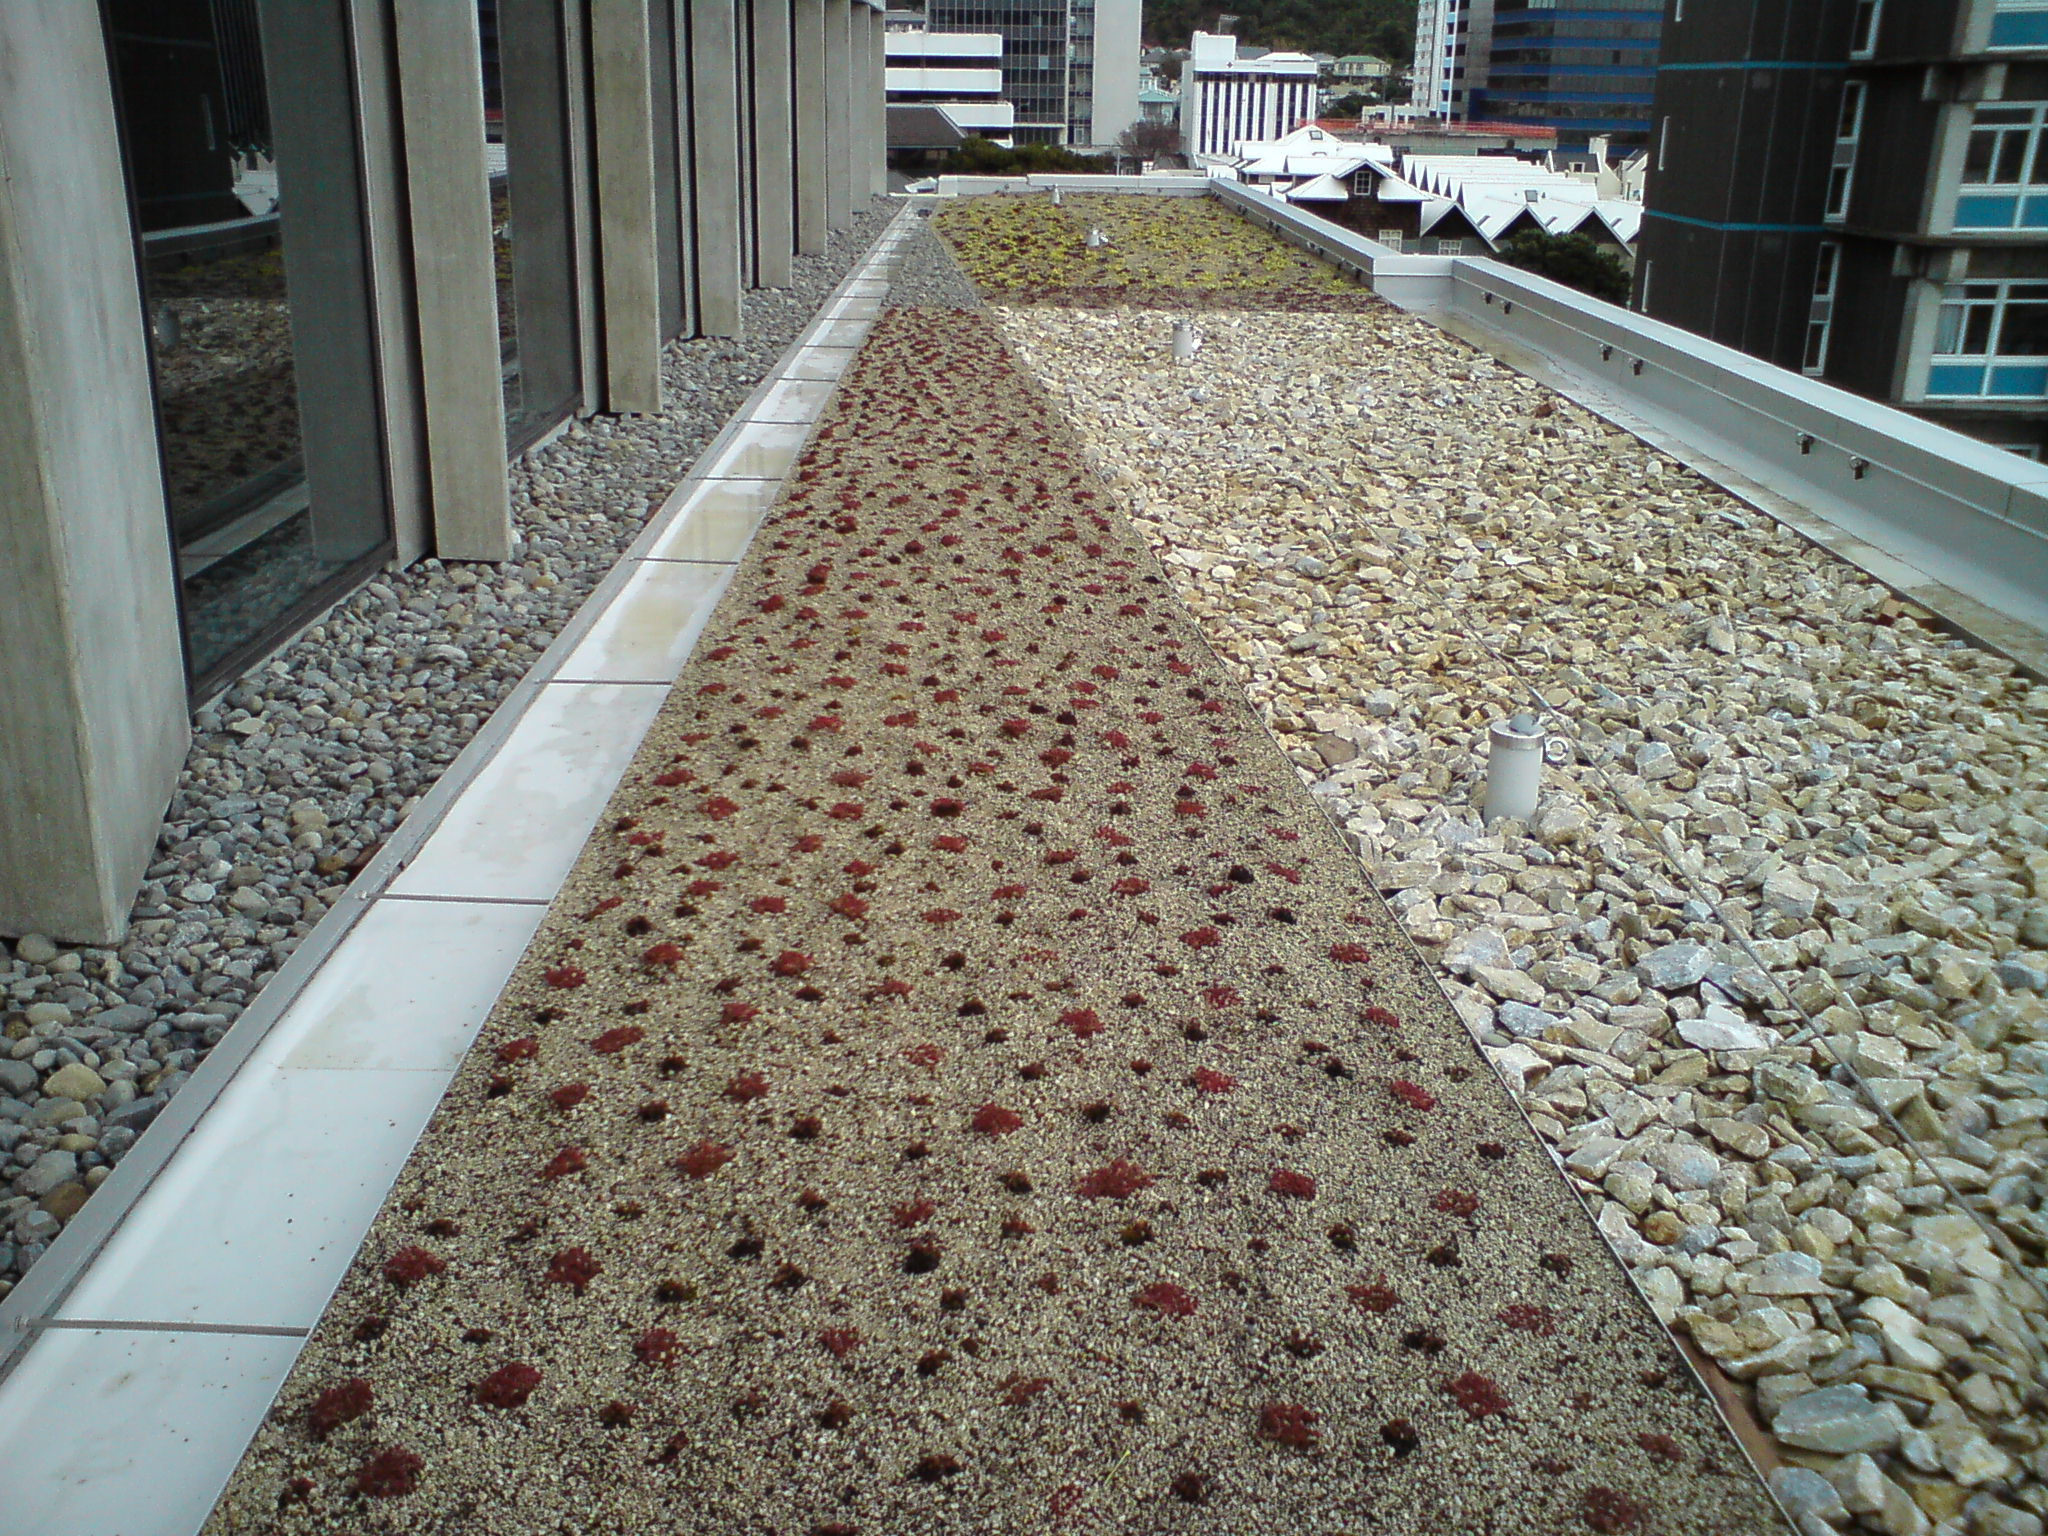 finished the green roof at the University